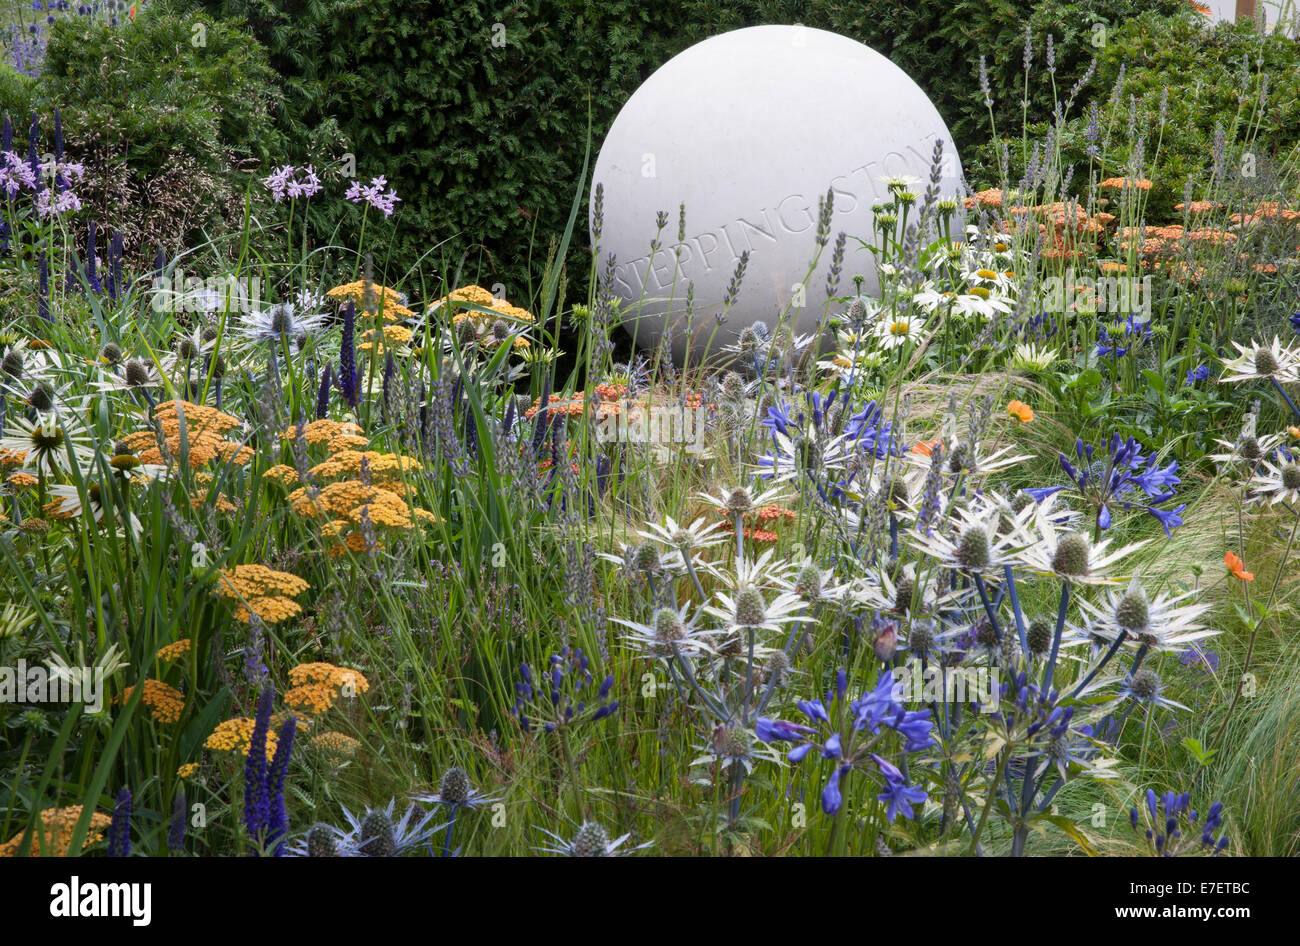 Garden - The Bounce Back Foundation Garden: Untying the Knot - view of garden with stone sculpture and planting Stock Photo